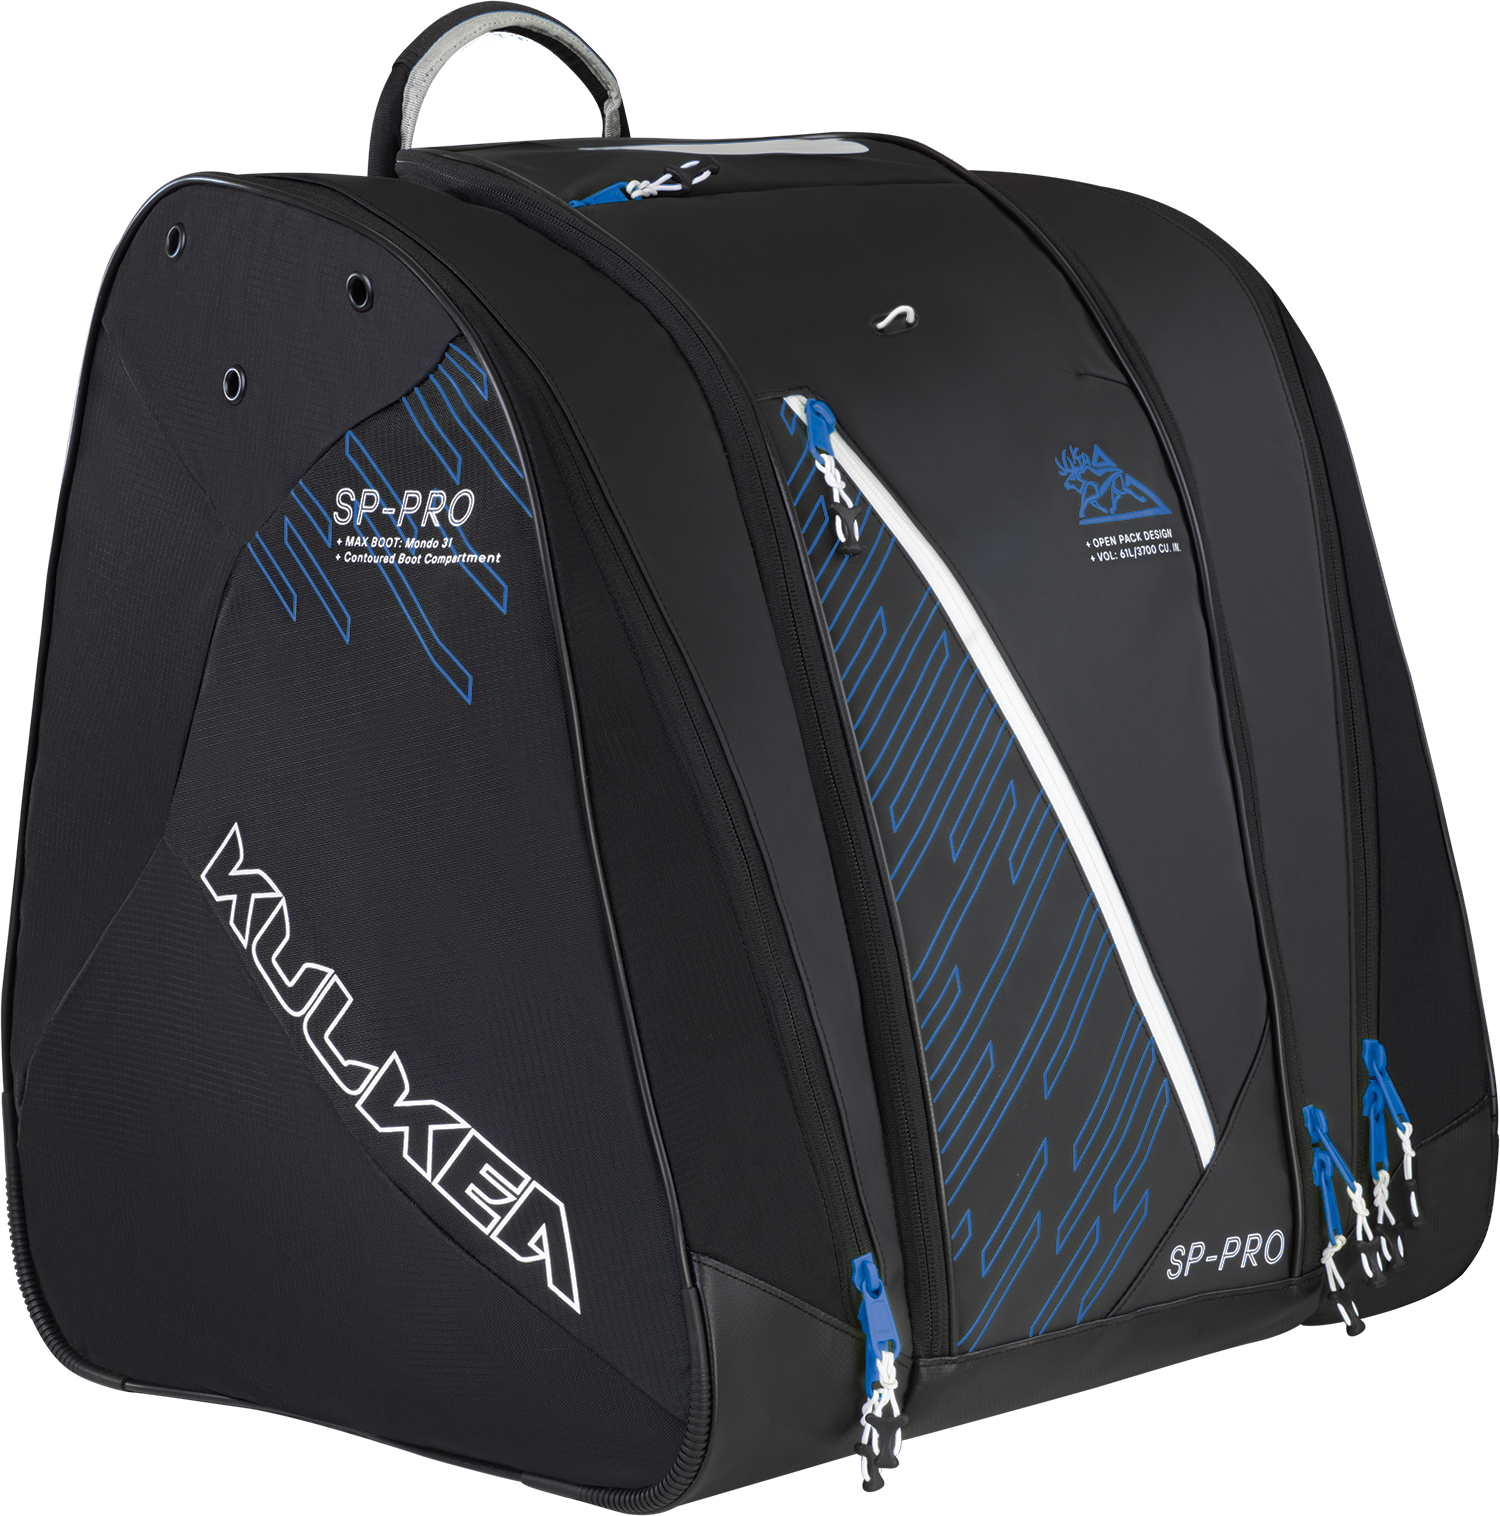 Kulkea boot bag all black with blue accents, smaller than the boot trekker bag, big enough to fit ski boots, helmet, gloves, etc.